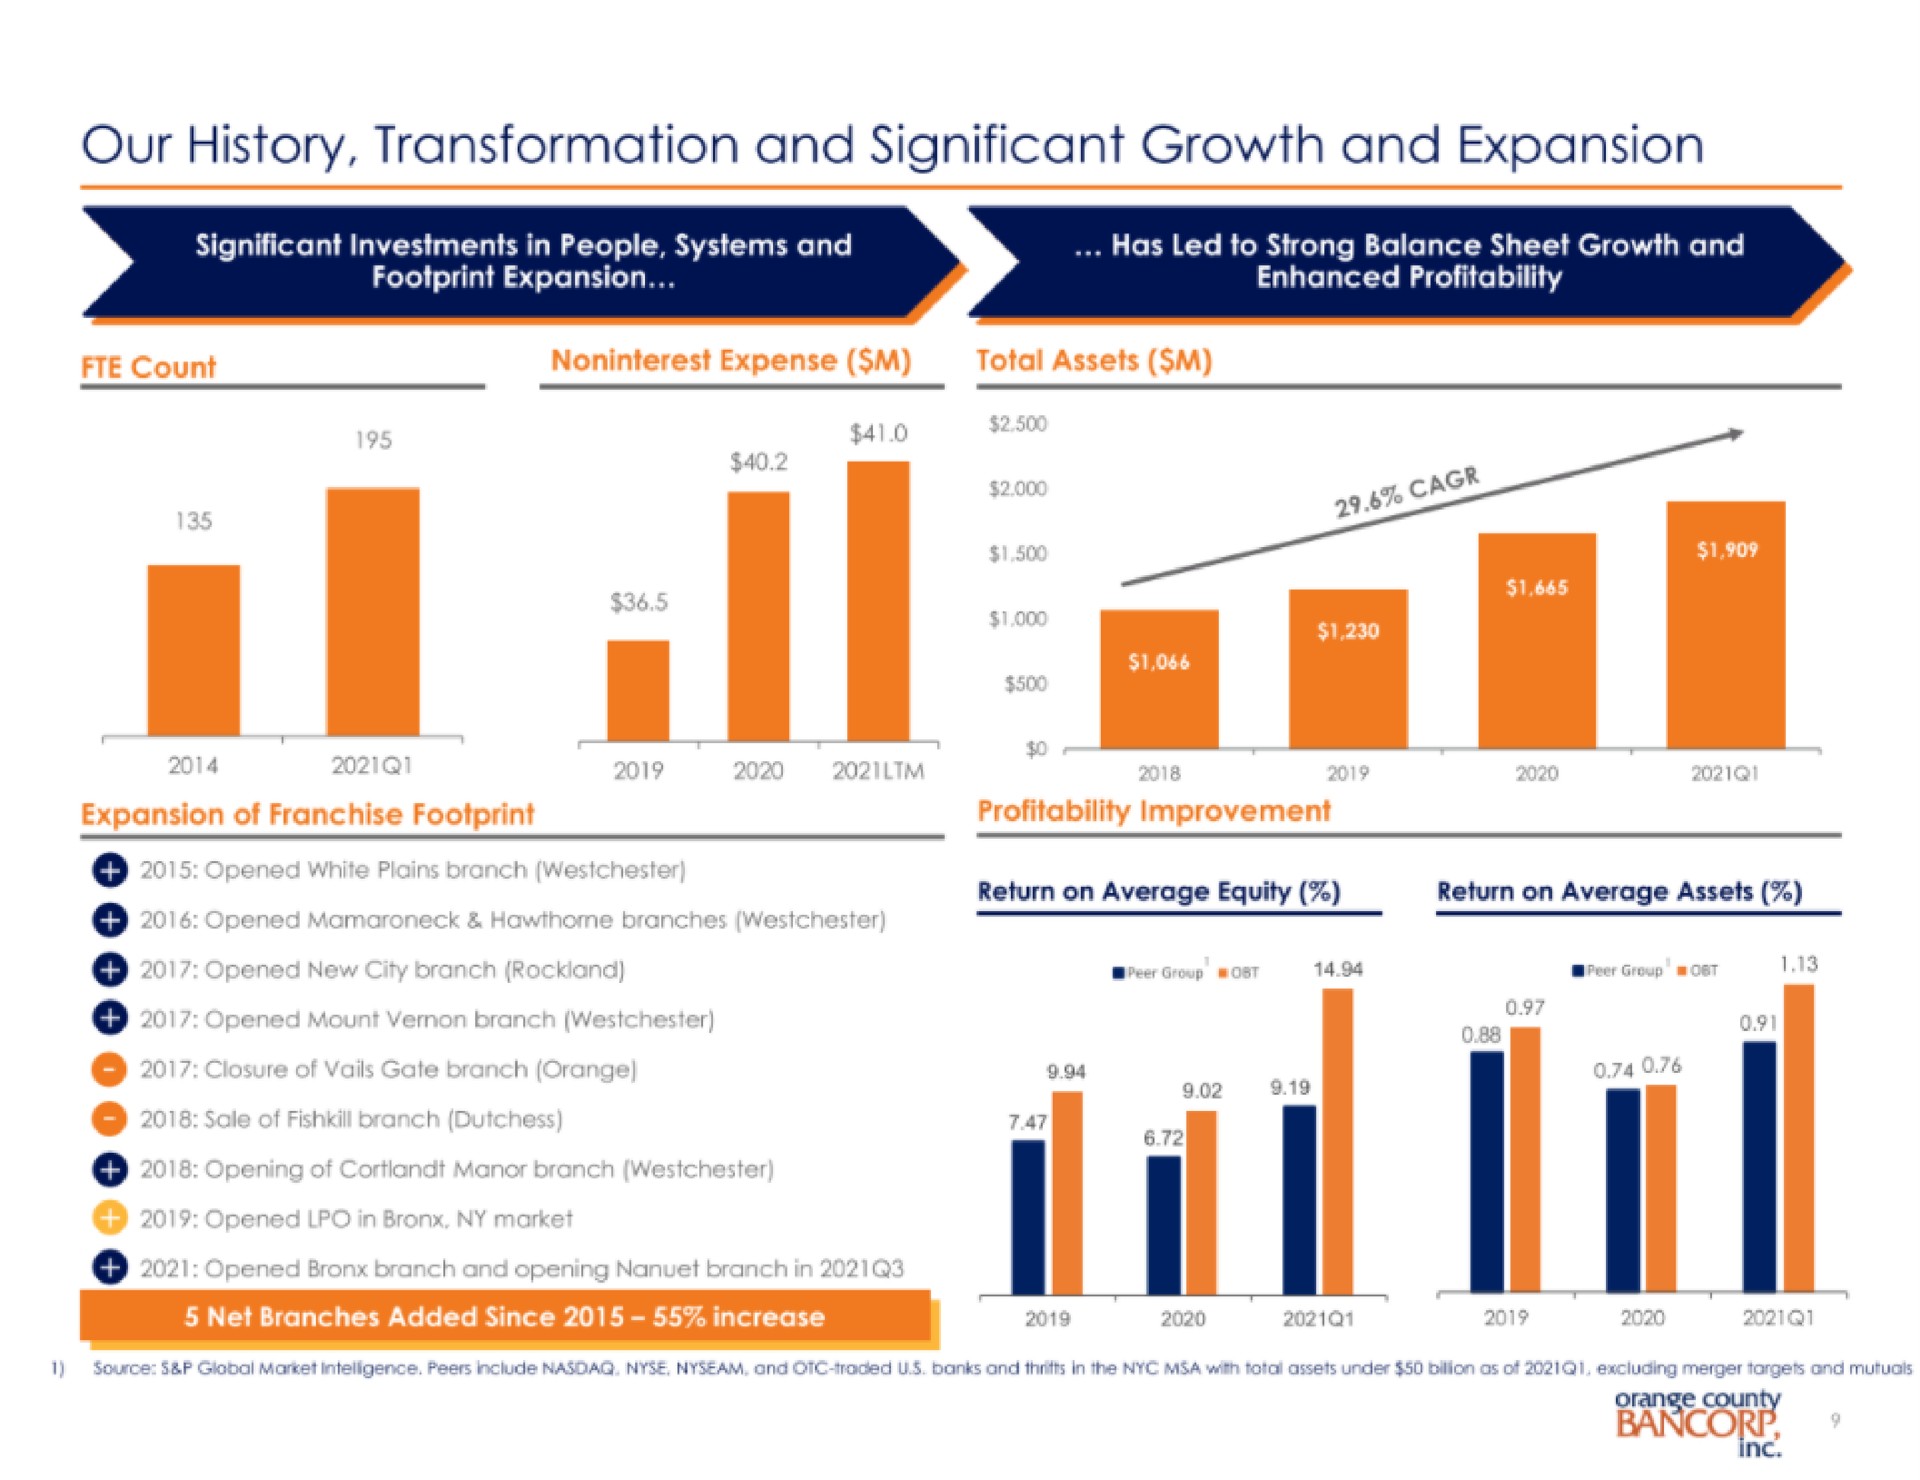 our history transformation and significant growth and expansion | Orange County Bancorp